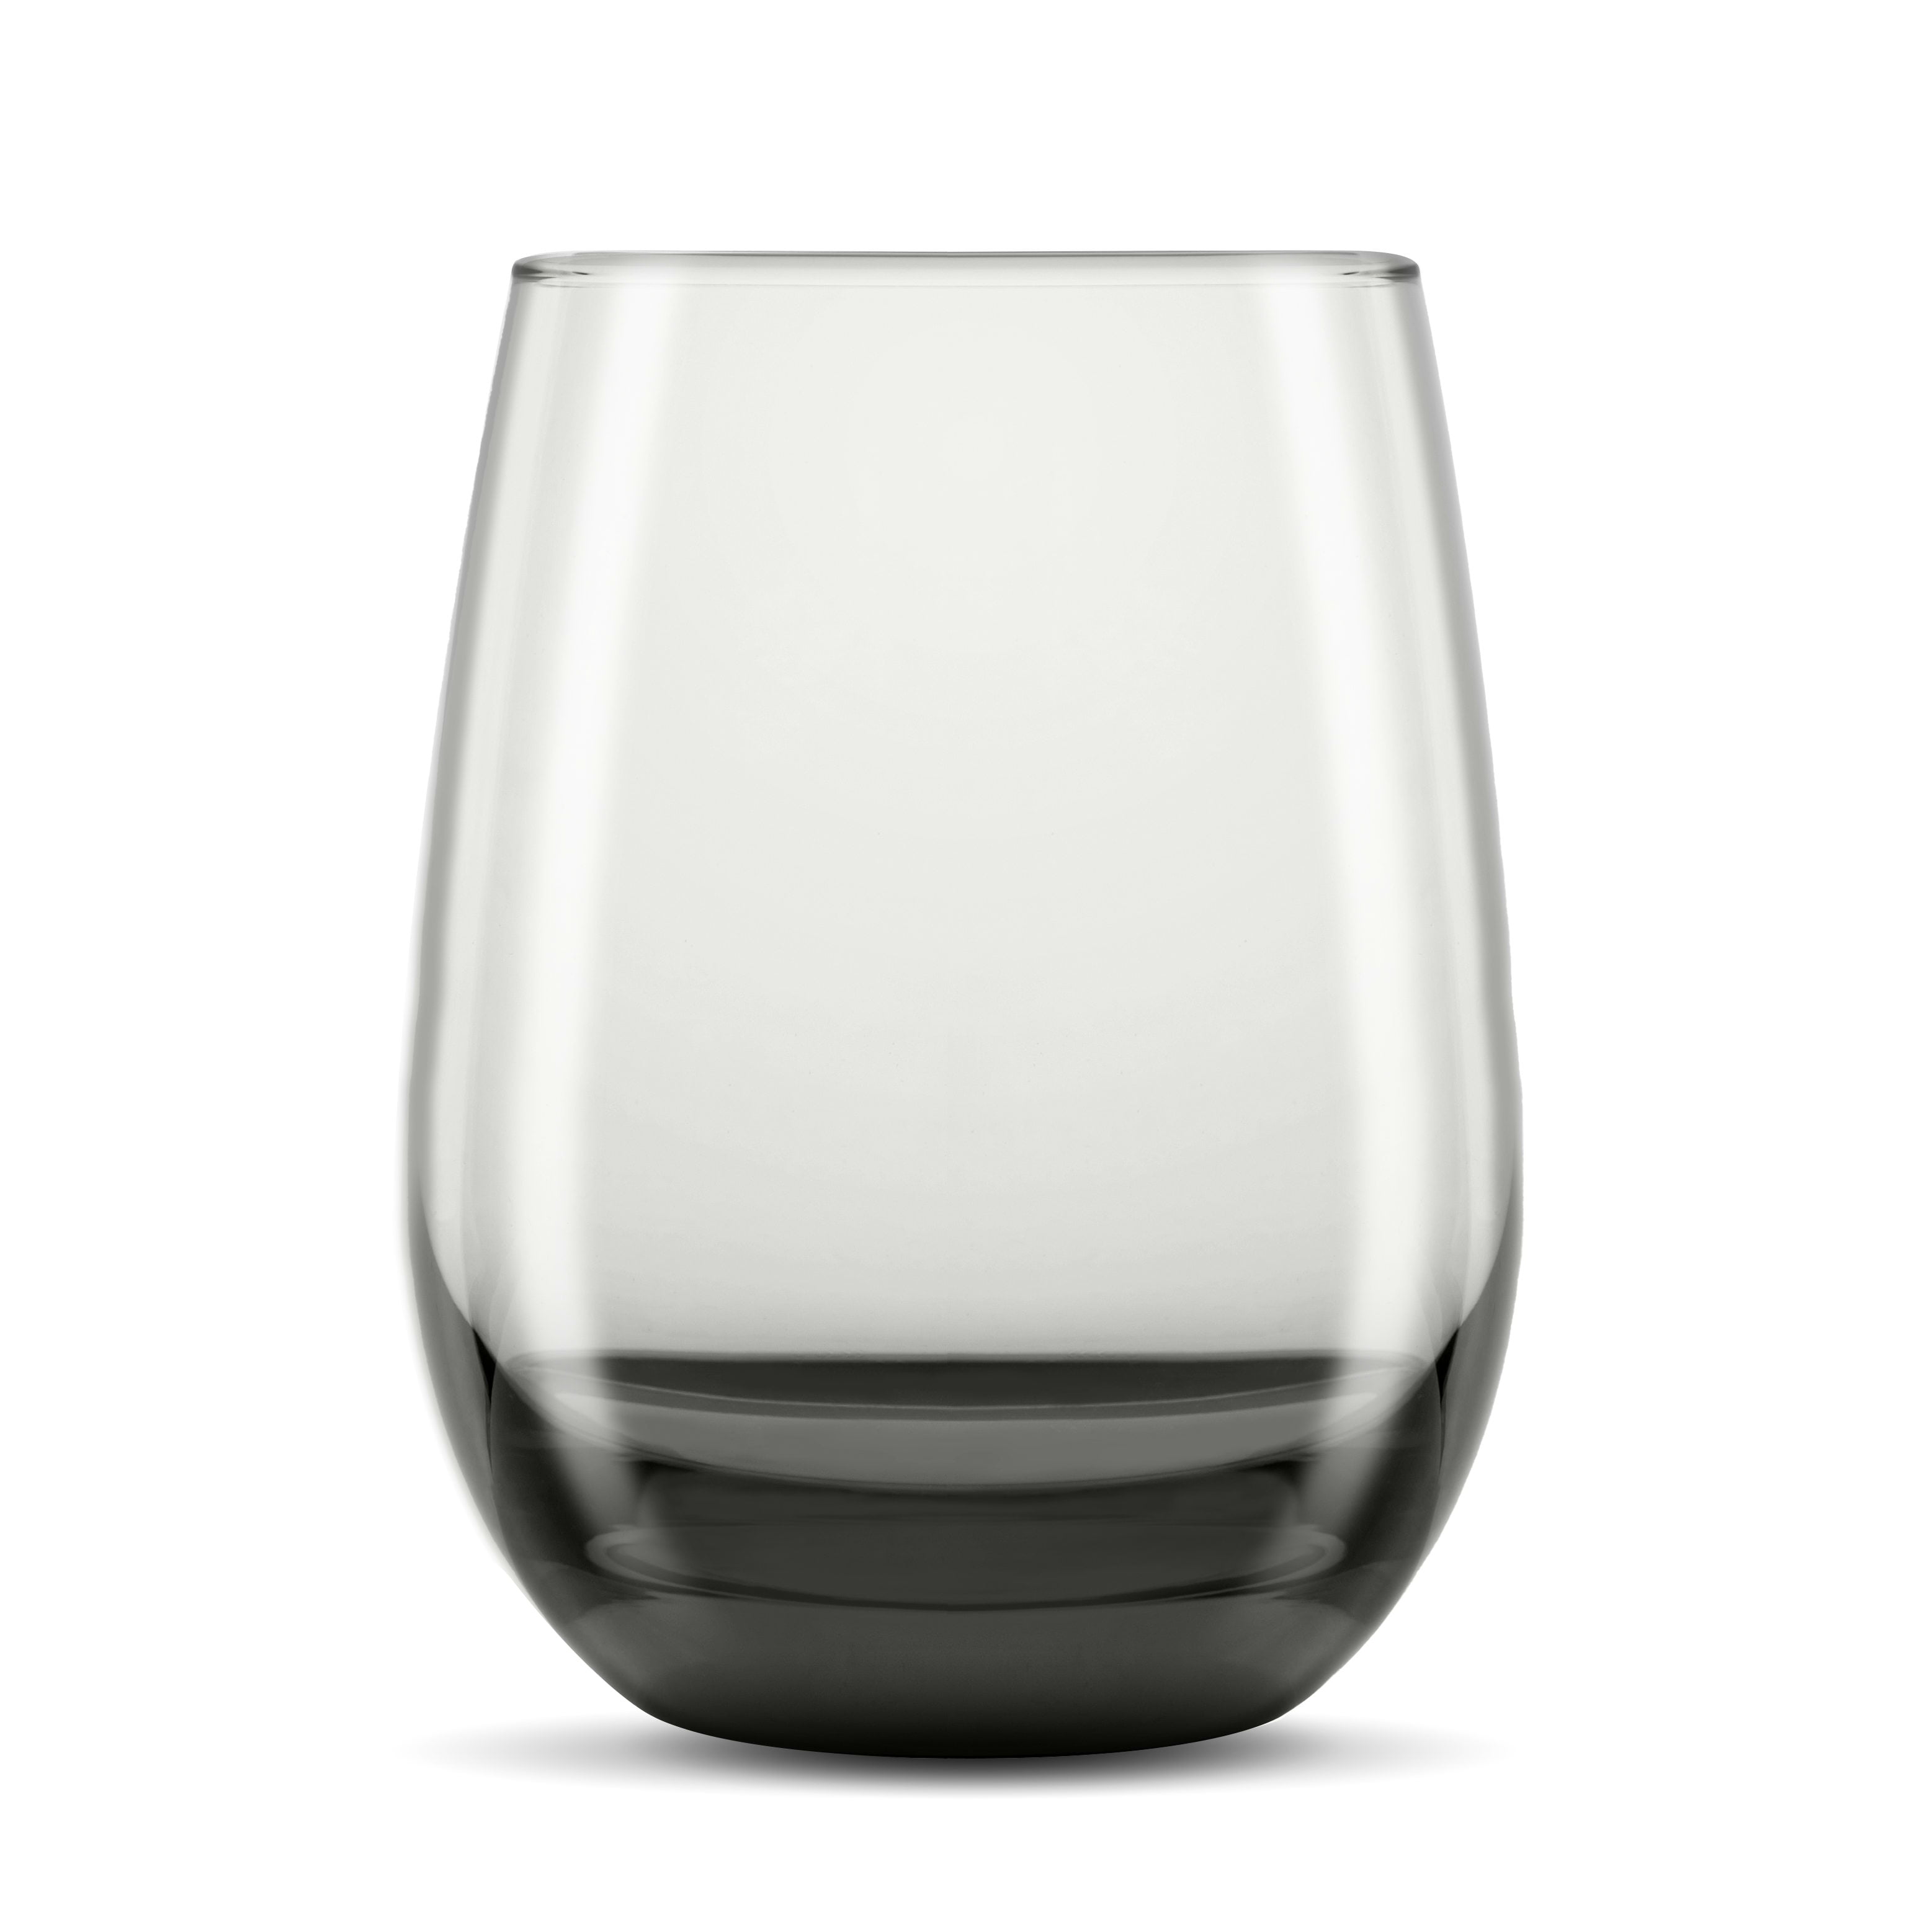 Libbey Hammered Stemless All-Purpose Wine Glasses, 17-ounce, Set of 8